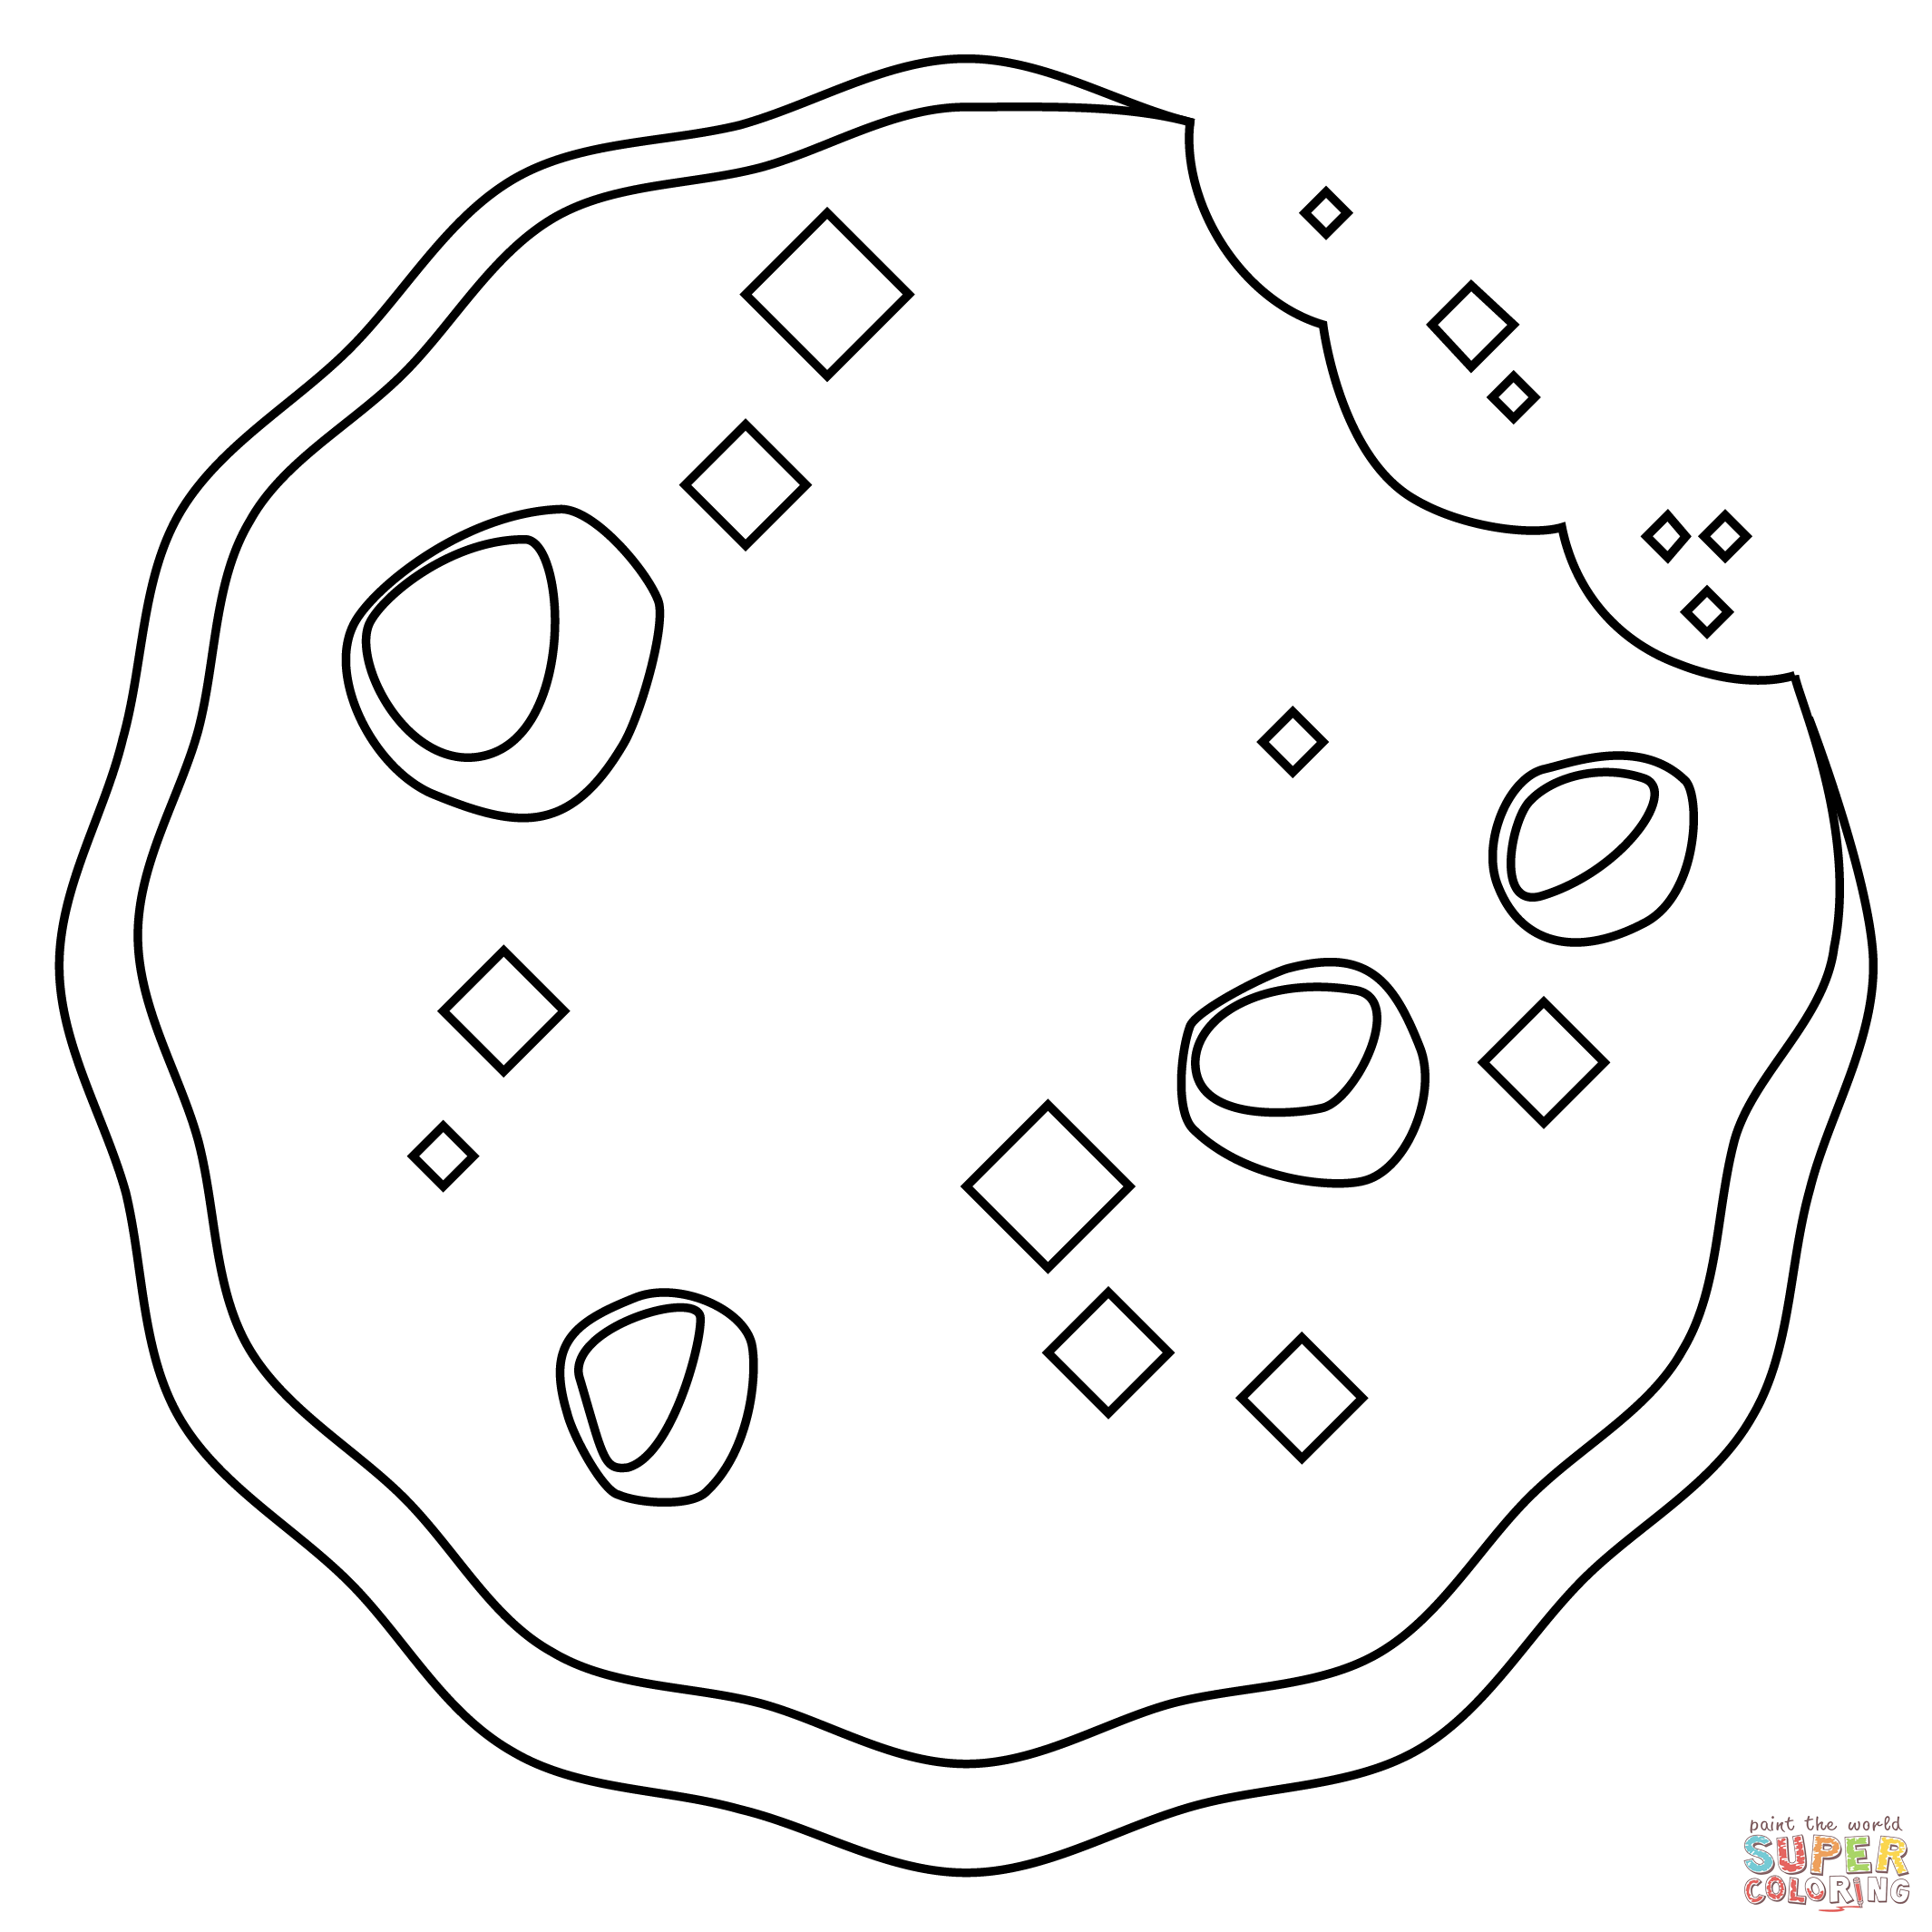 Cookie coloring page | Free Printable Coloring Pages